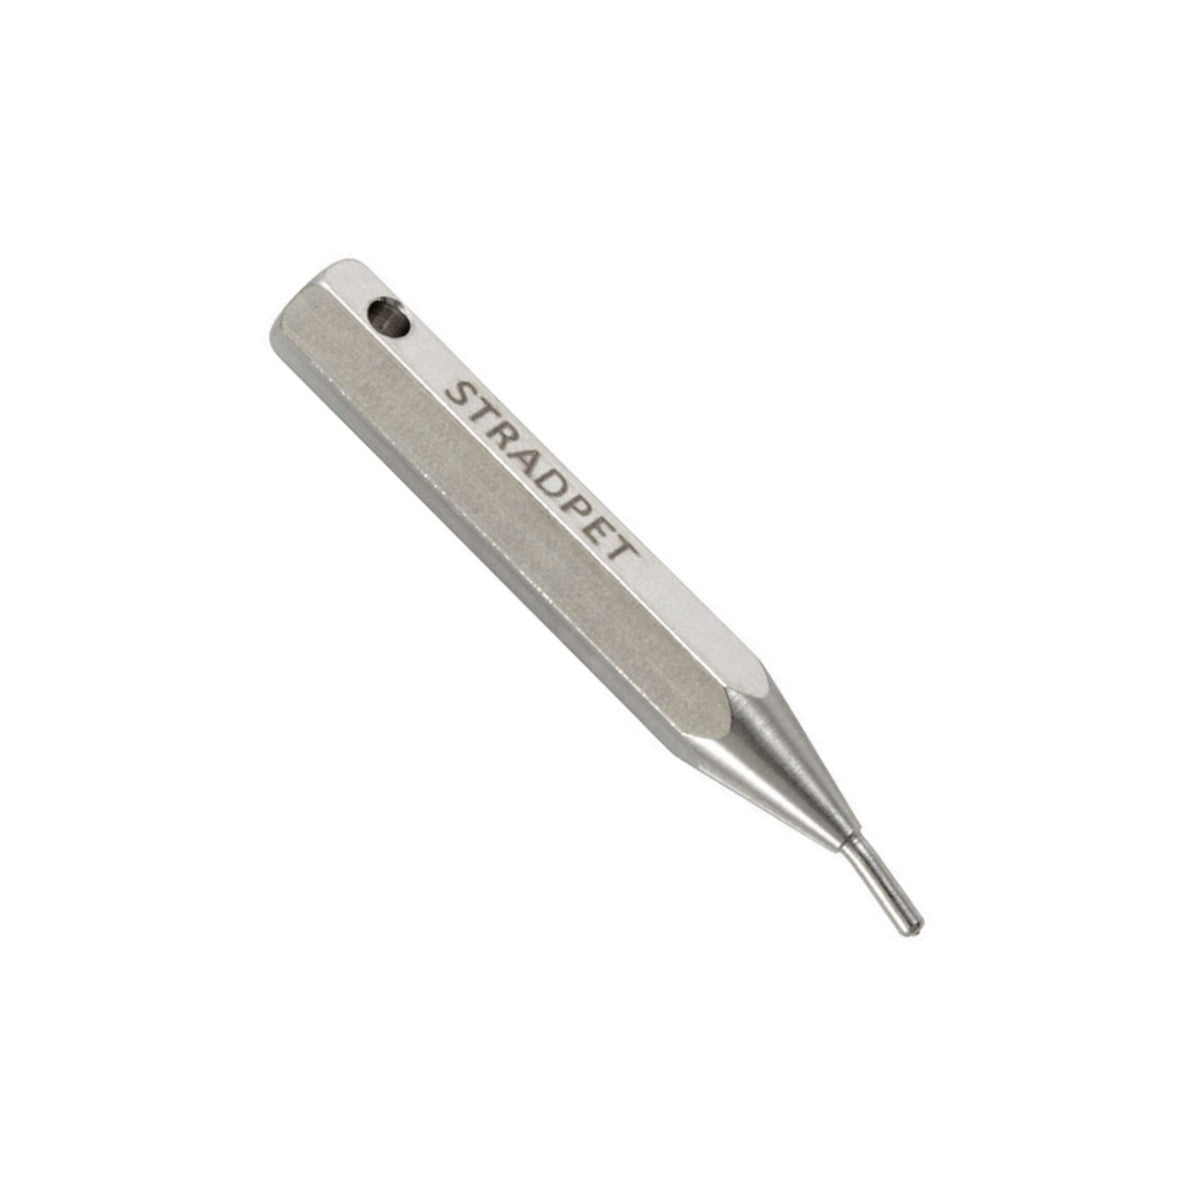 Stainless Steel Chinrest Key